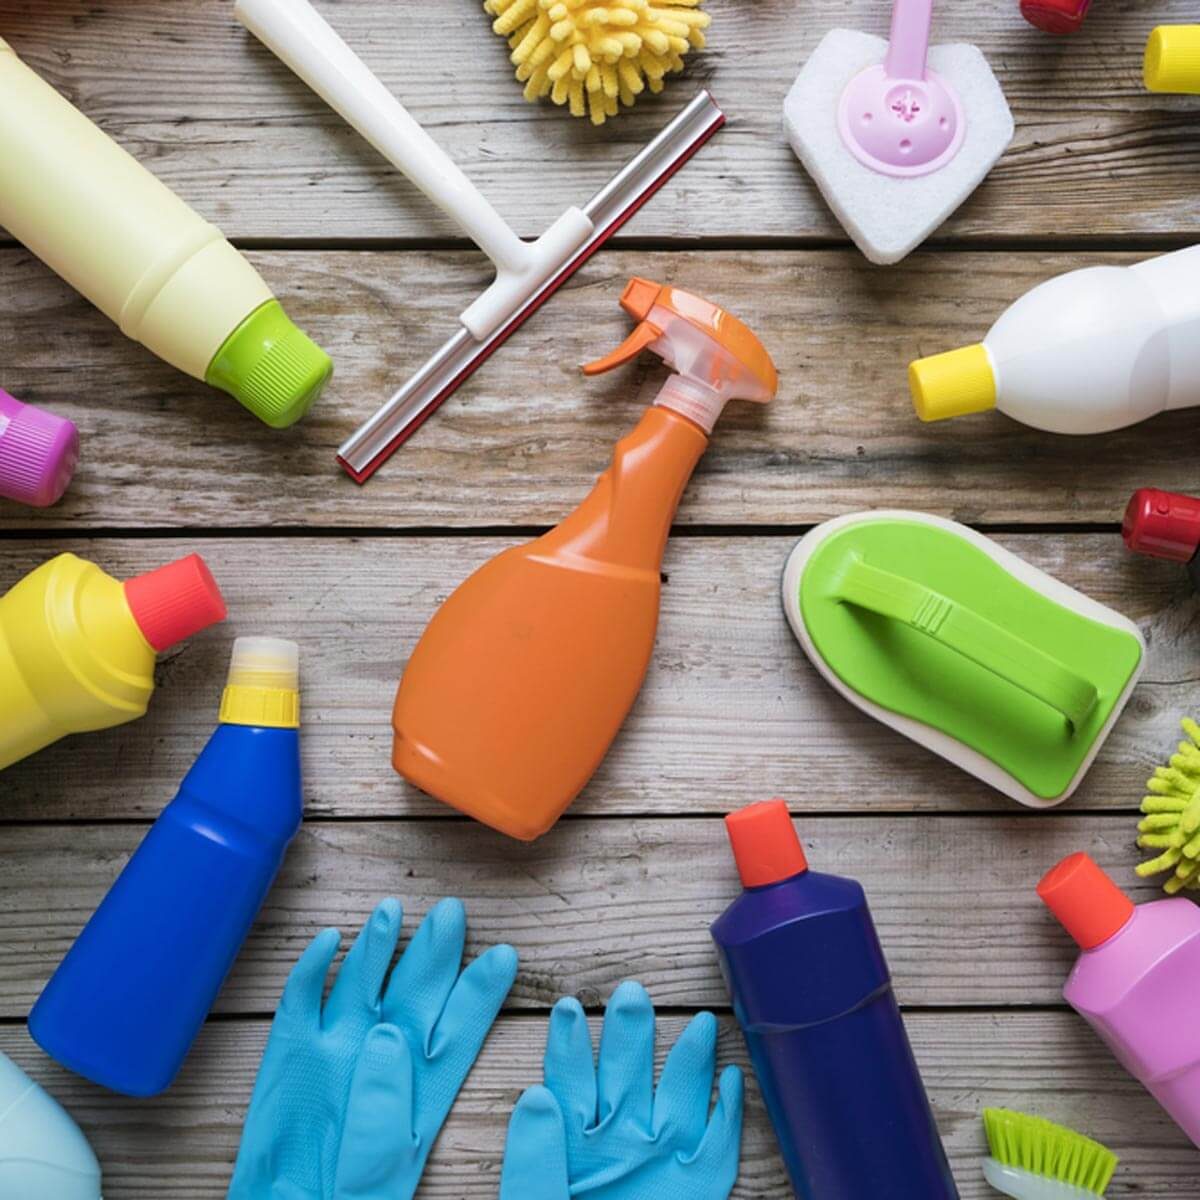 shutterstock_607985402 cleaning products